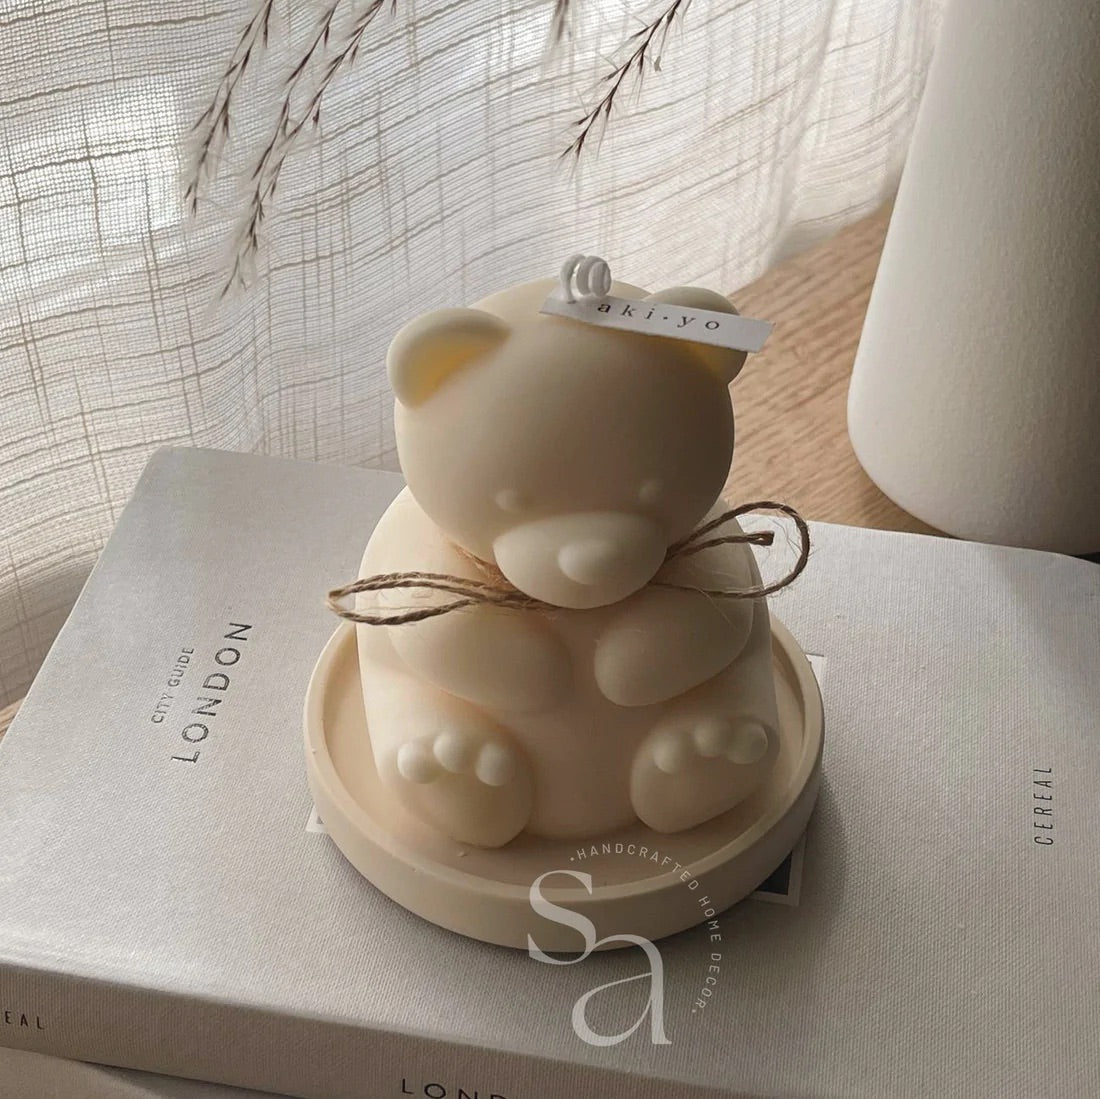 Teddy Bear Candle – wickly candle